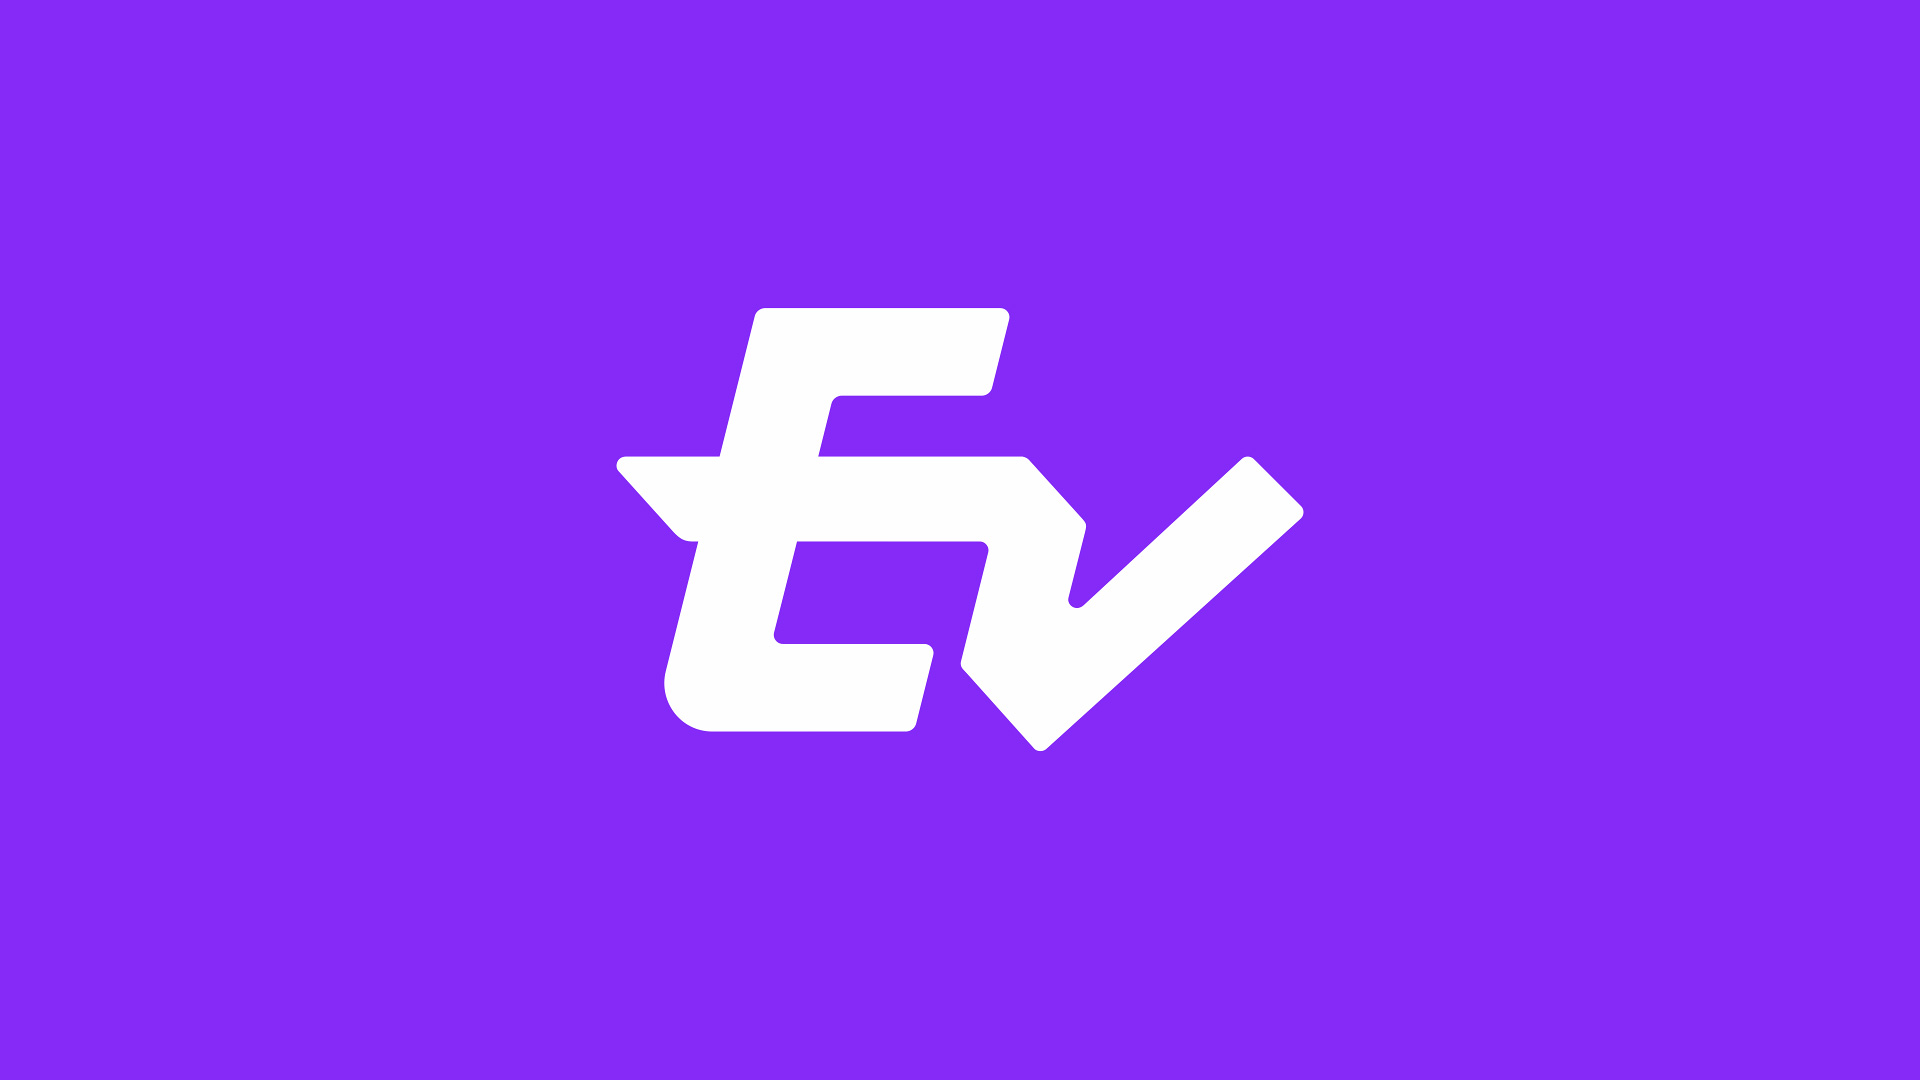 “Electric” Identity for EV Charging Network